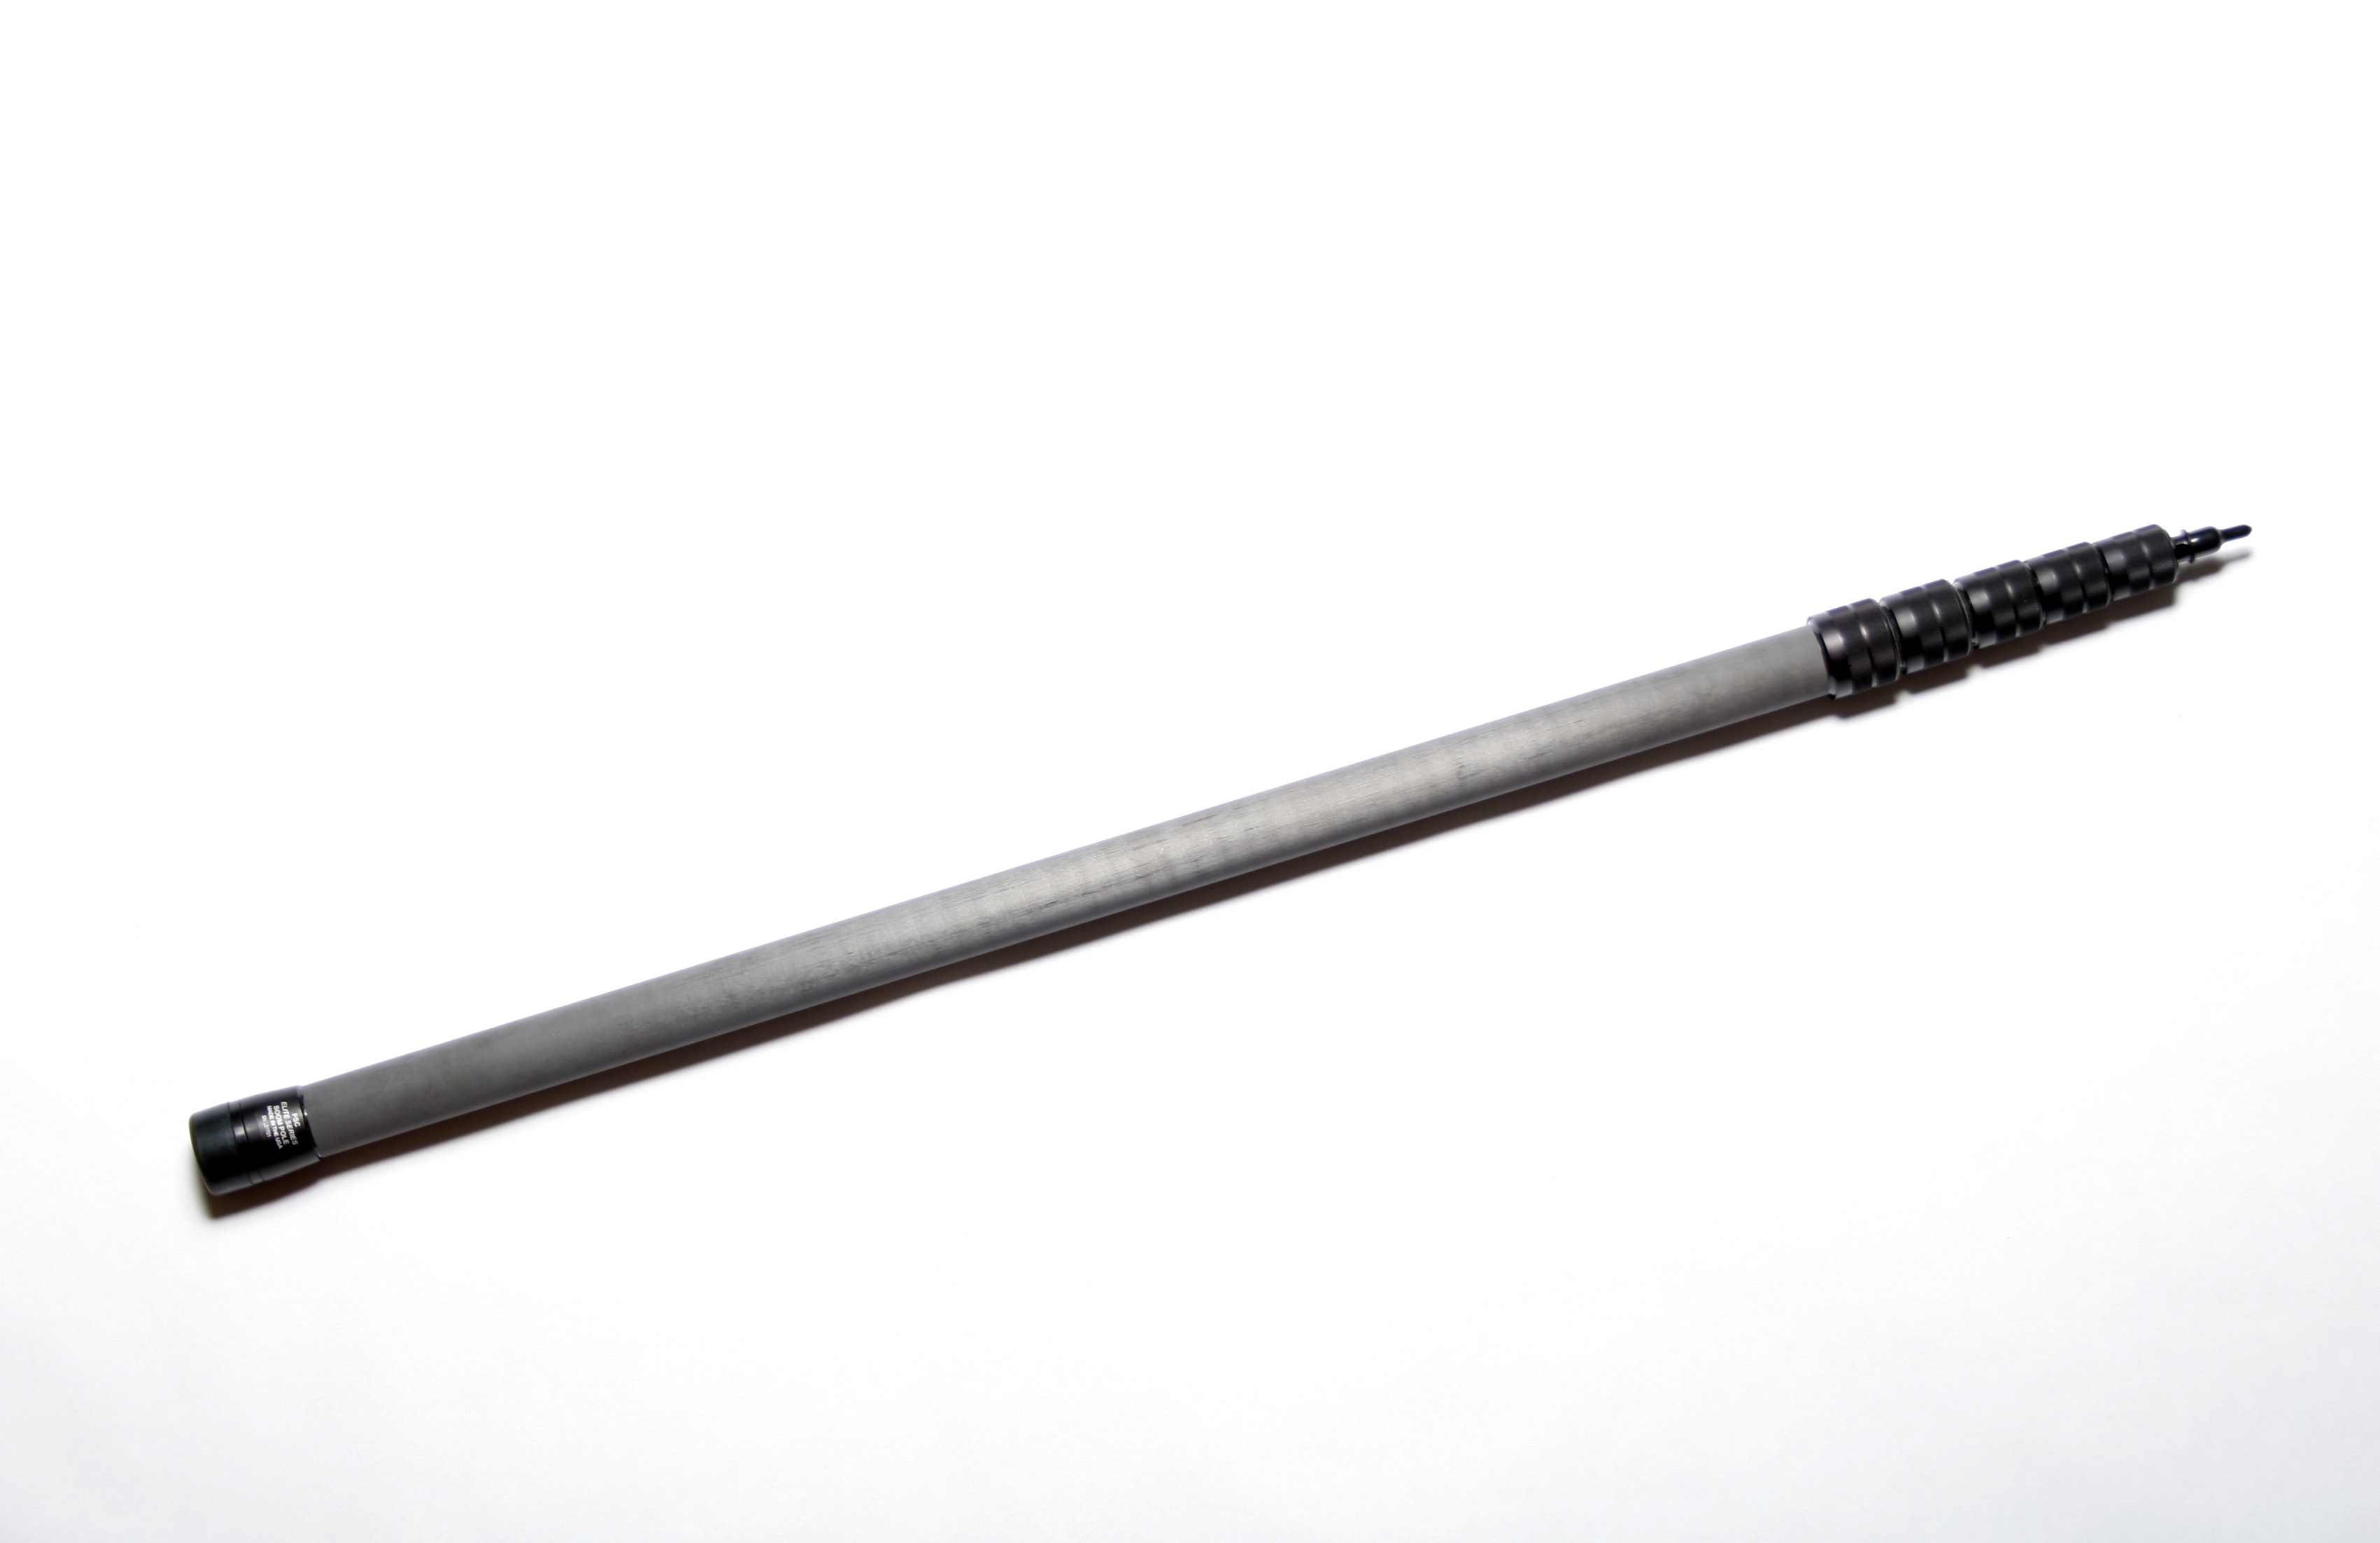 Large PSC Elite Boom Pole only, no cable